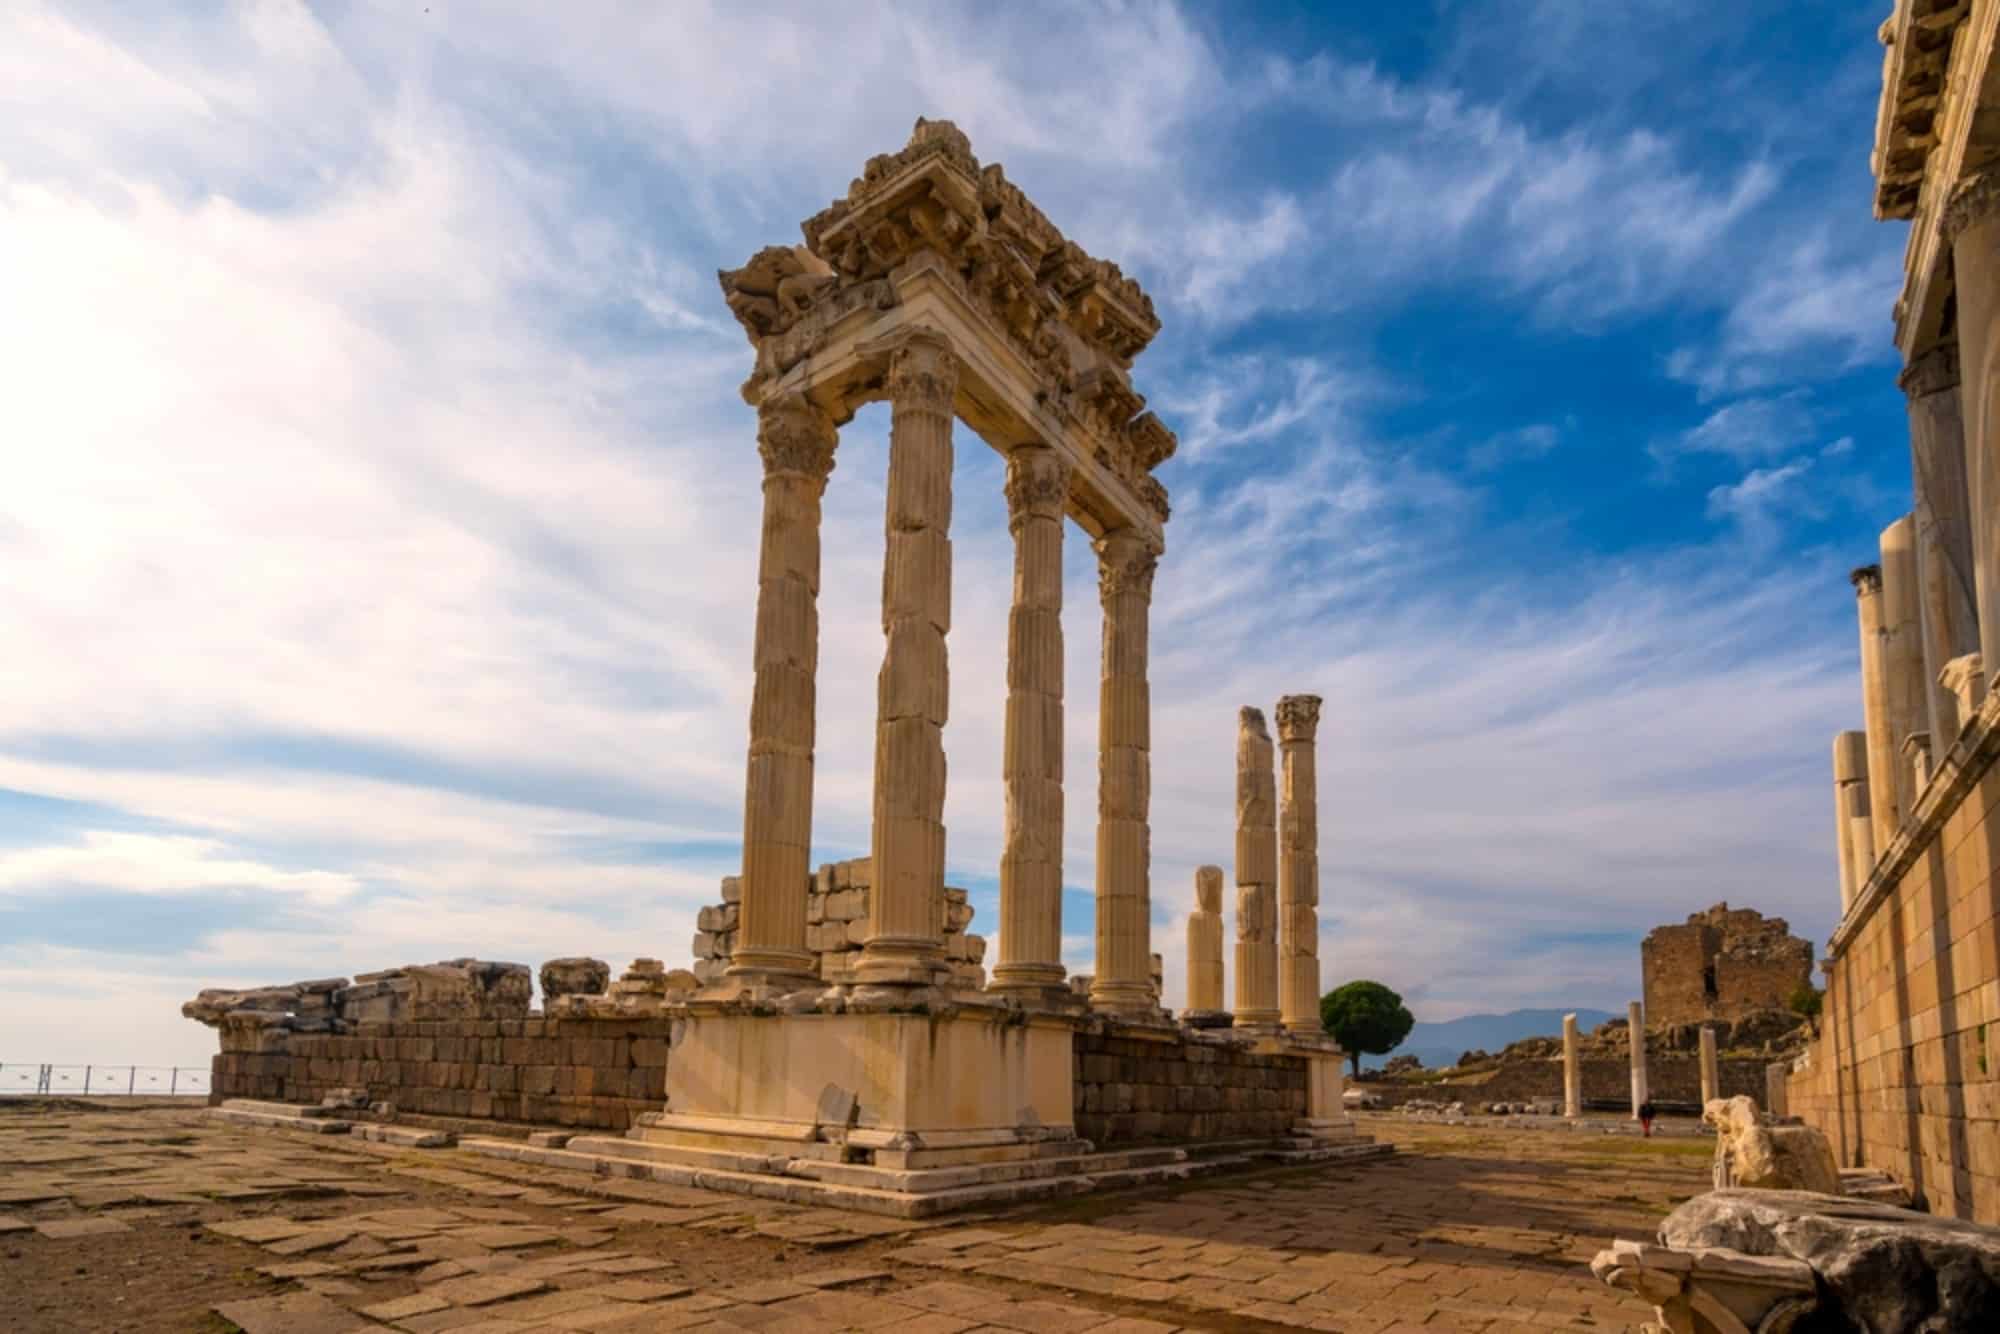 Ruins of the Temple of Trajan